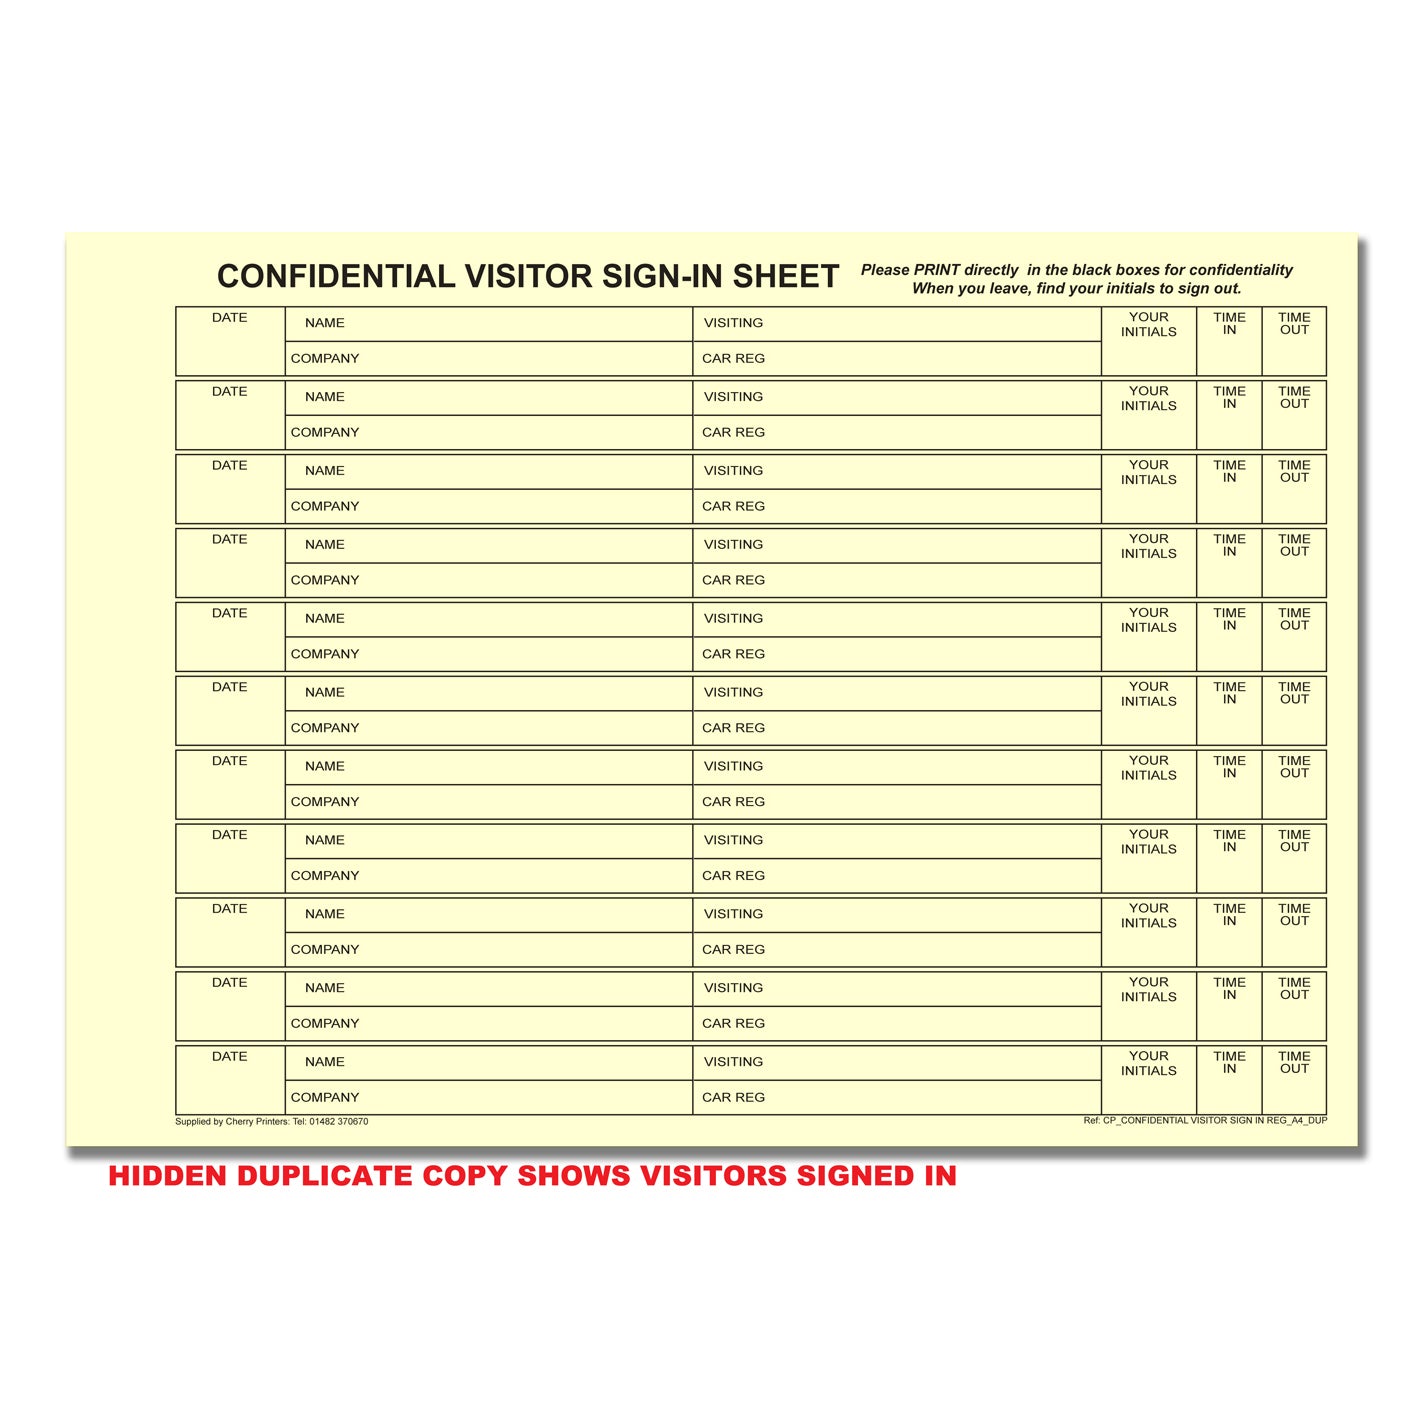 Confidential Visitor Sign In Log Book with Car Reg | Duplicate | 2 part | Carbonless | A4 - 8.27" x 11.69" | BOX OF 20 BOOKS